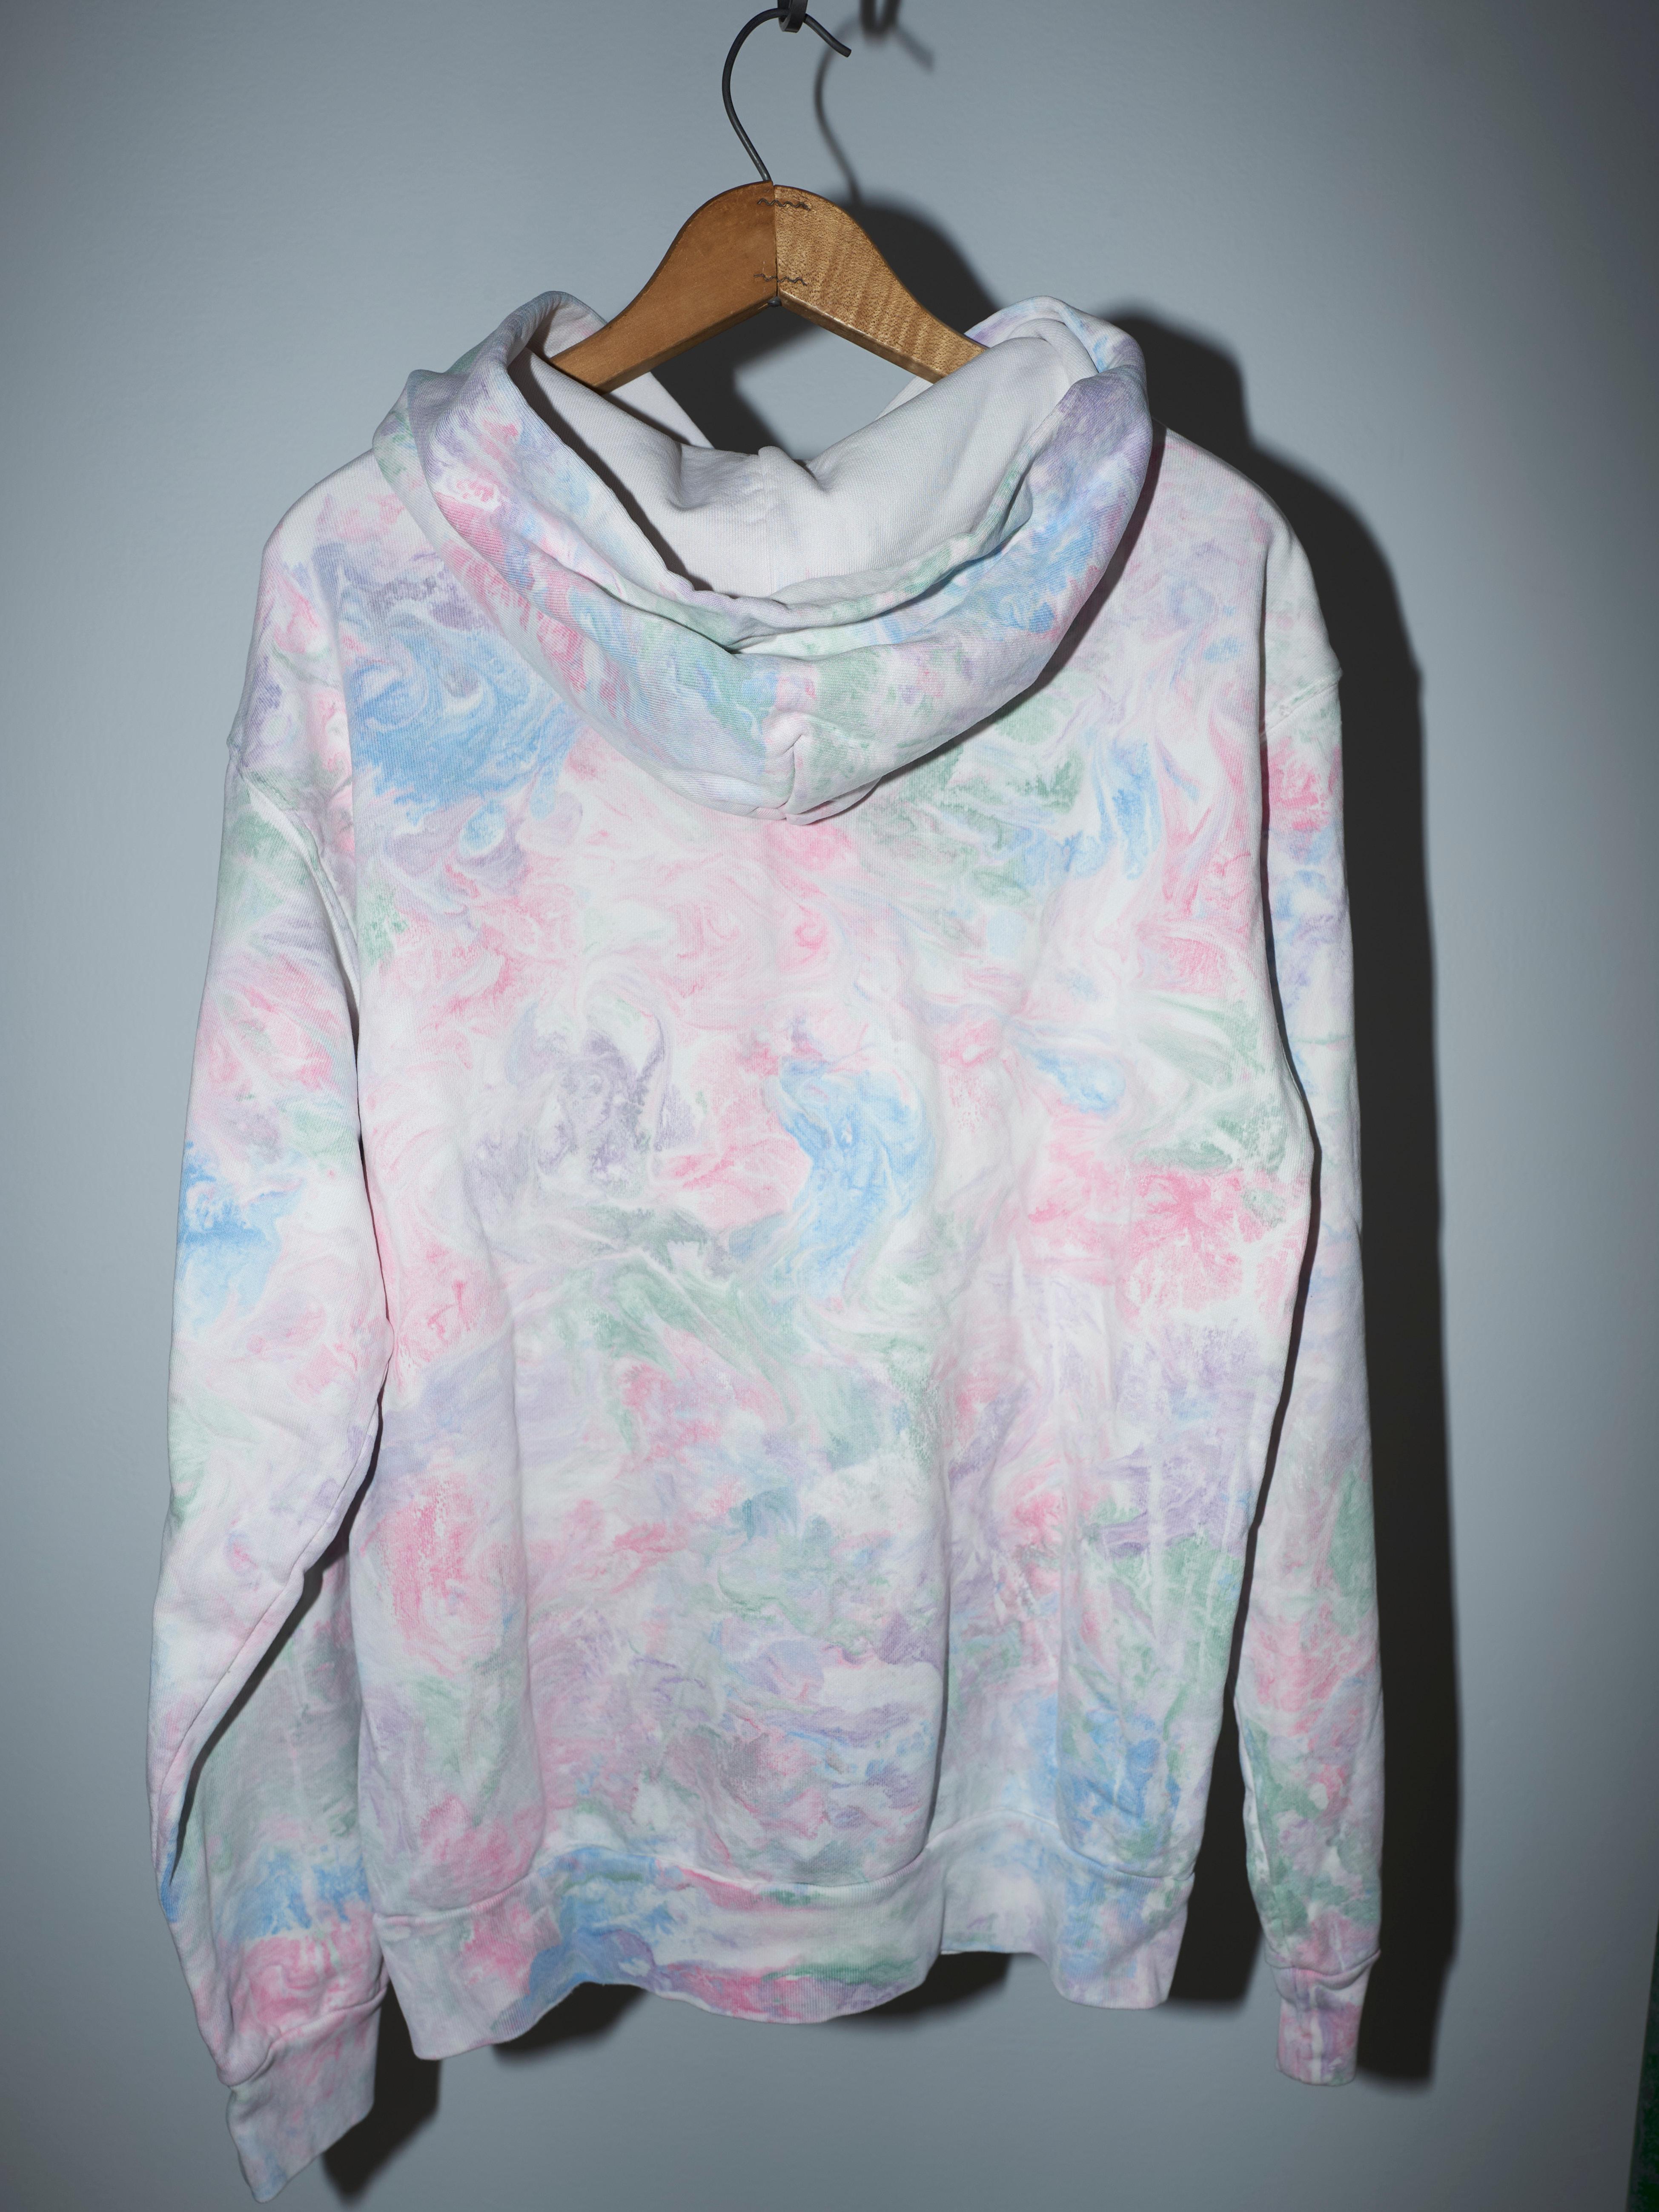 Hoodie Pastel Marble Cotton Embellished Chain Patchwork J Dauphin 9